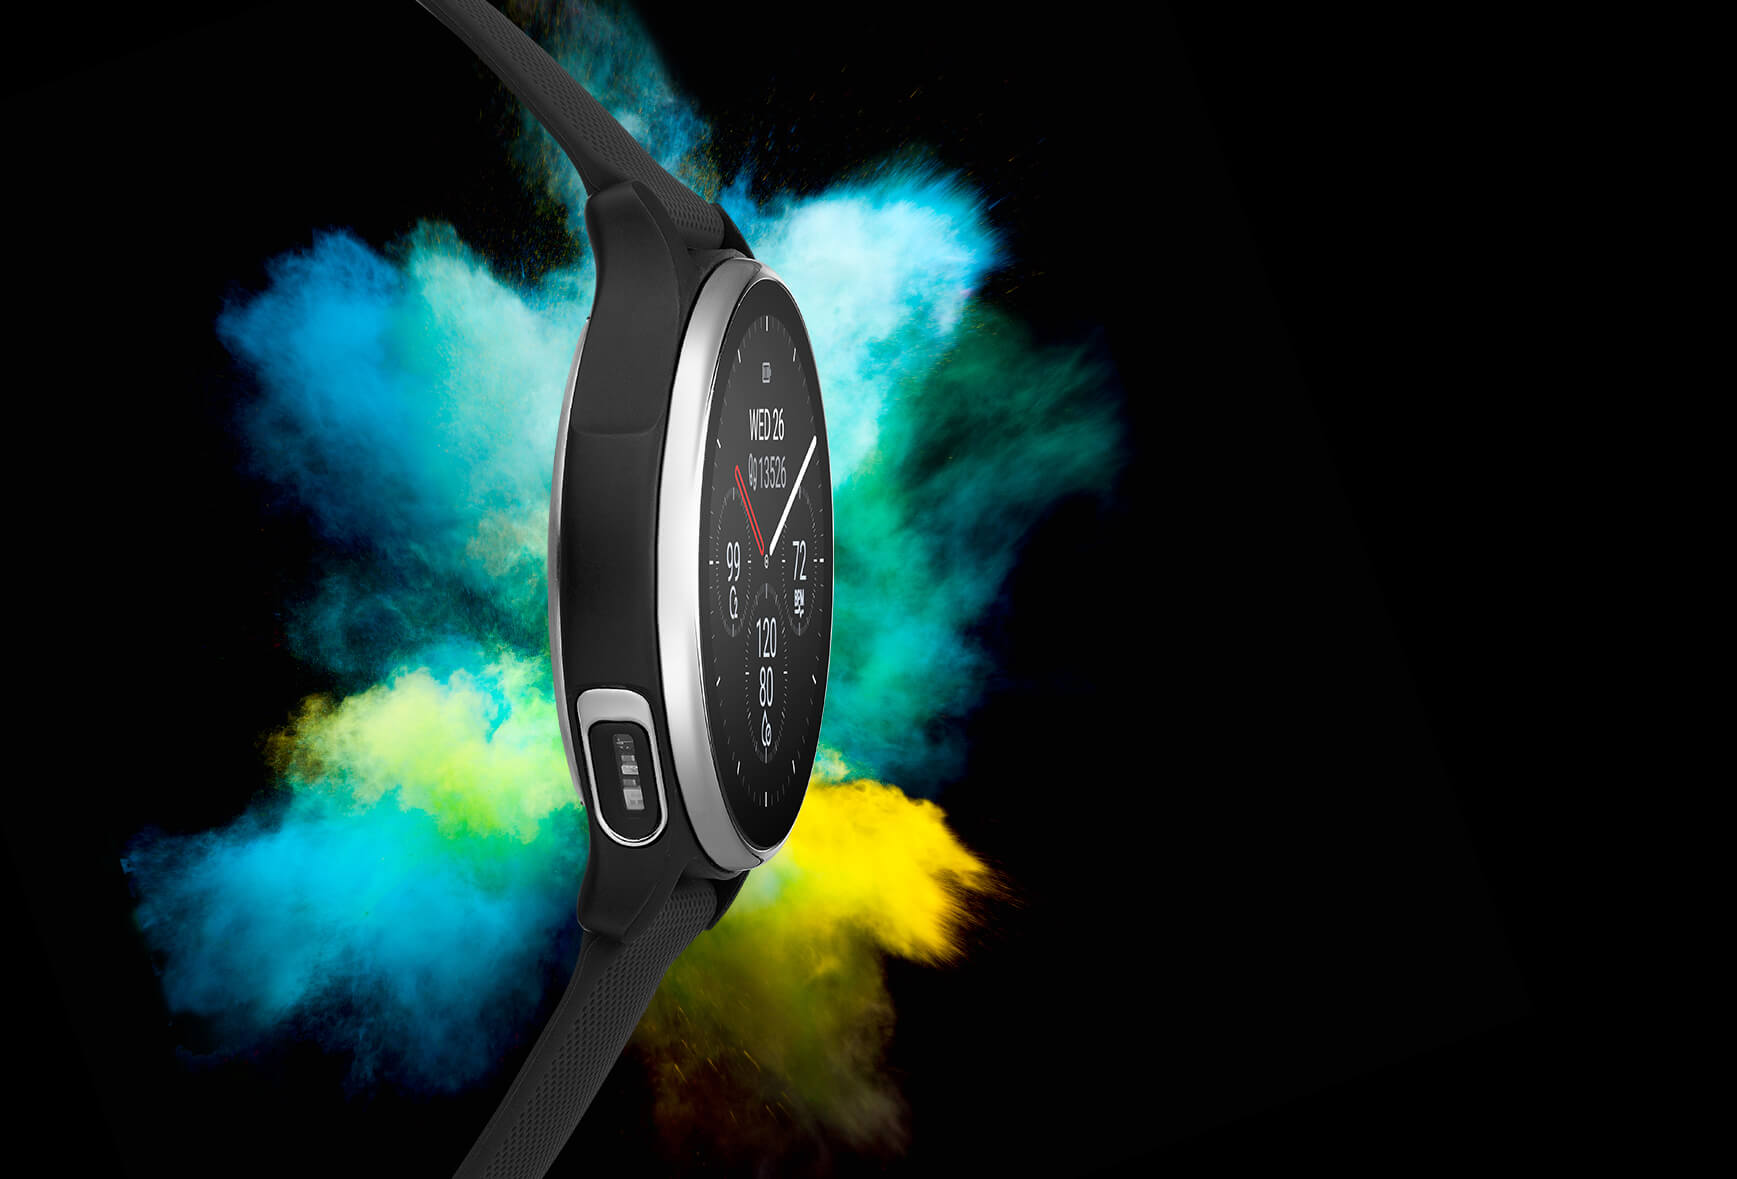 ASUS VivoWatch 6 with vibrant background showing powerful living assistant features